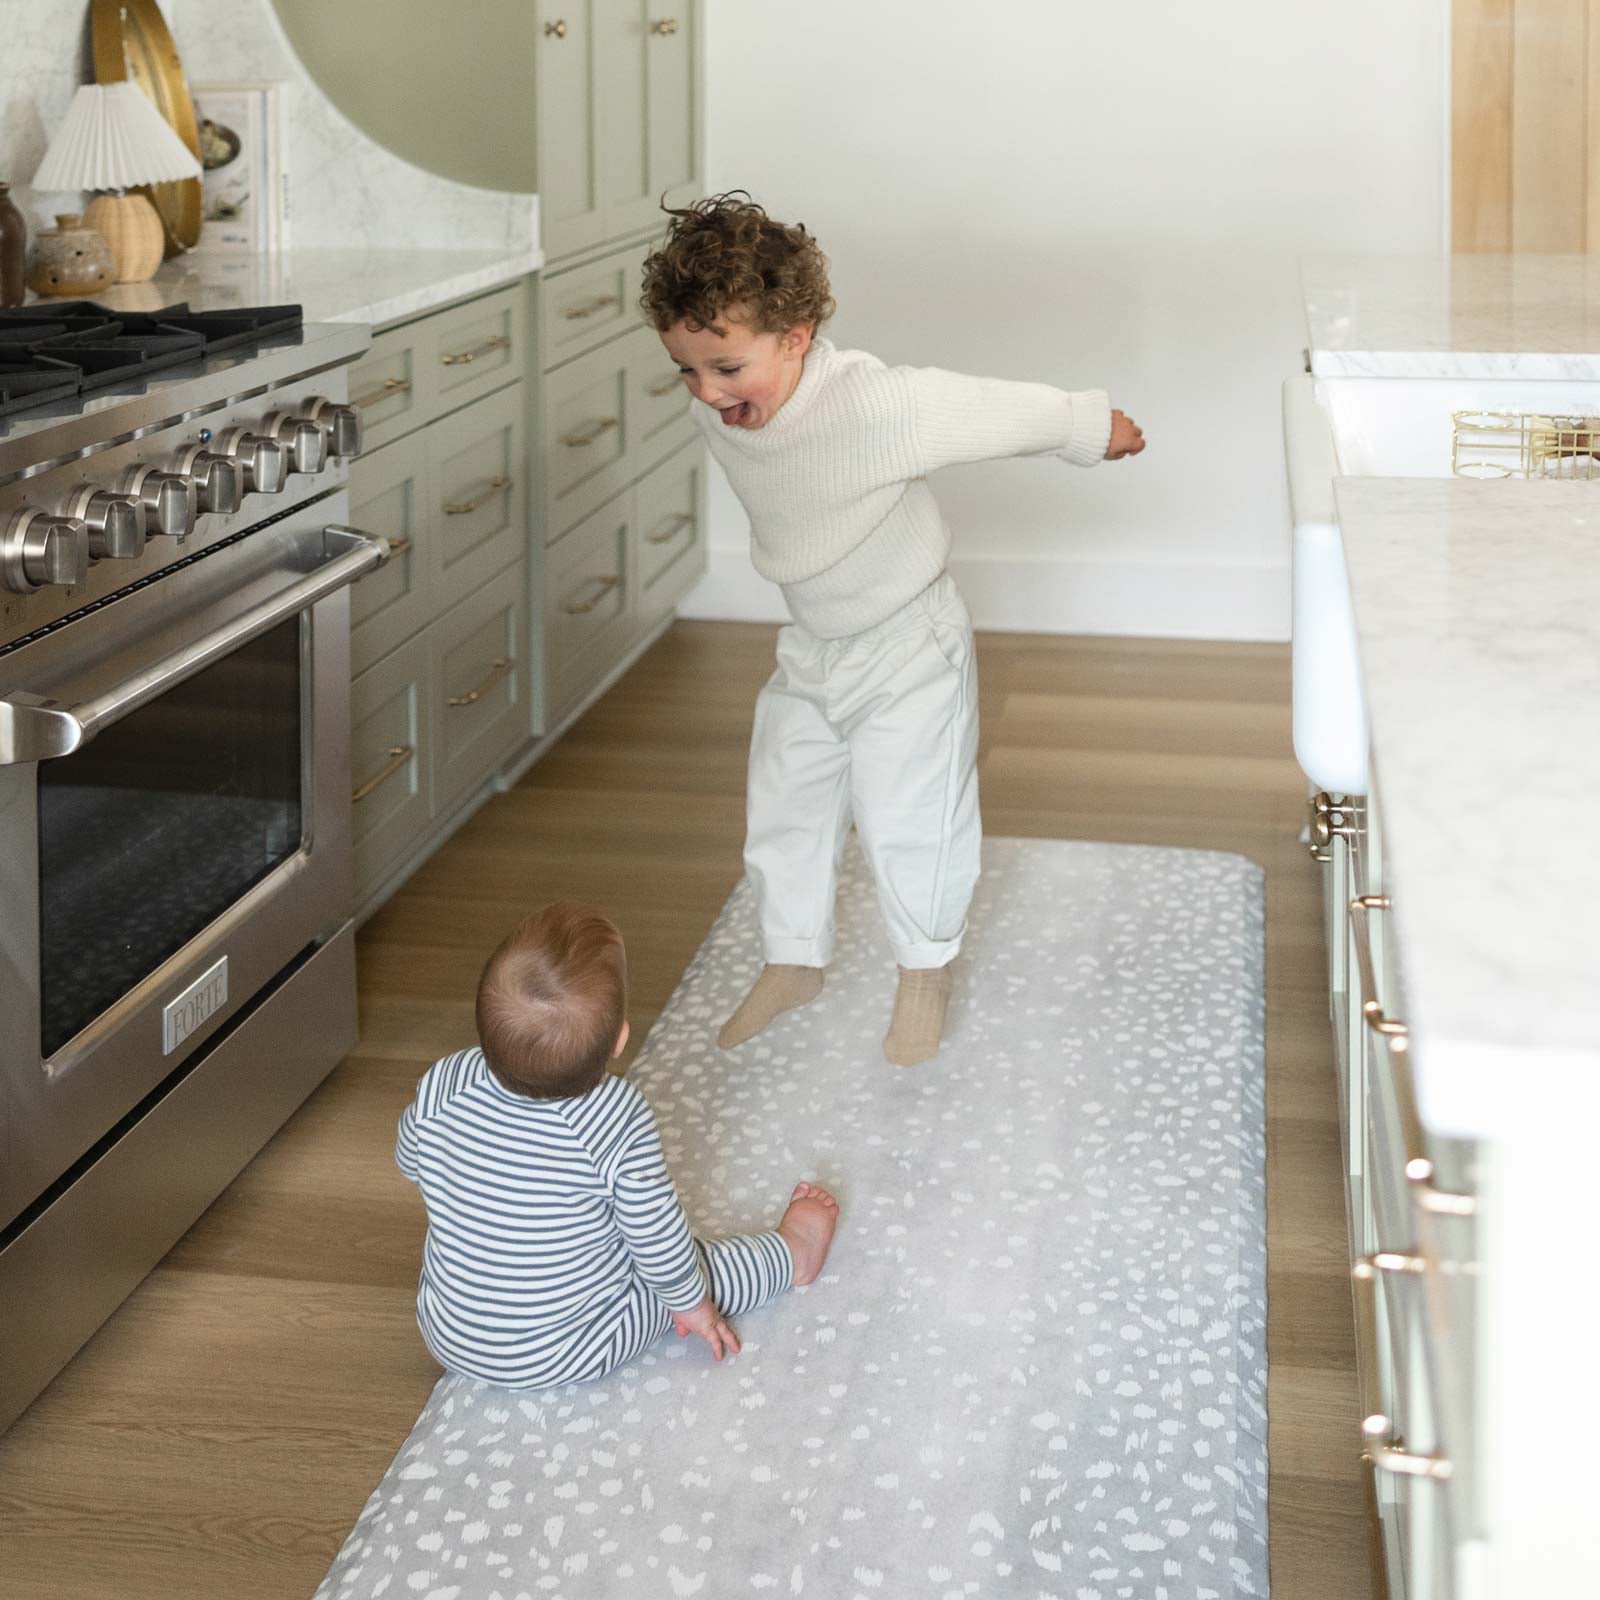 Fawn silver gray animal print standing mat shown in kitchen in size 30x108 with toddler boy jumping up and baby boy sitting on the mat looking at the older boy.